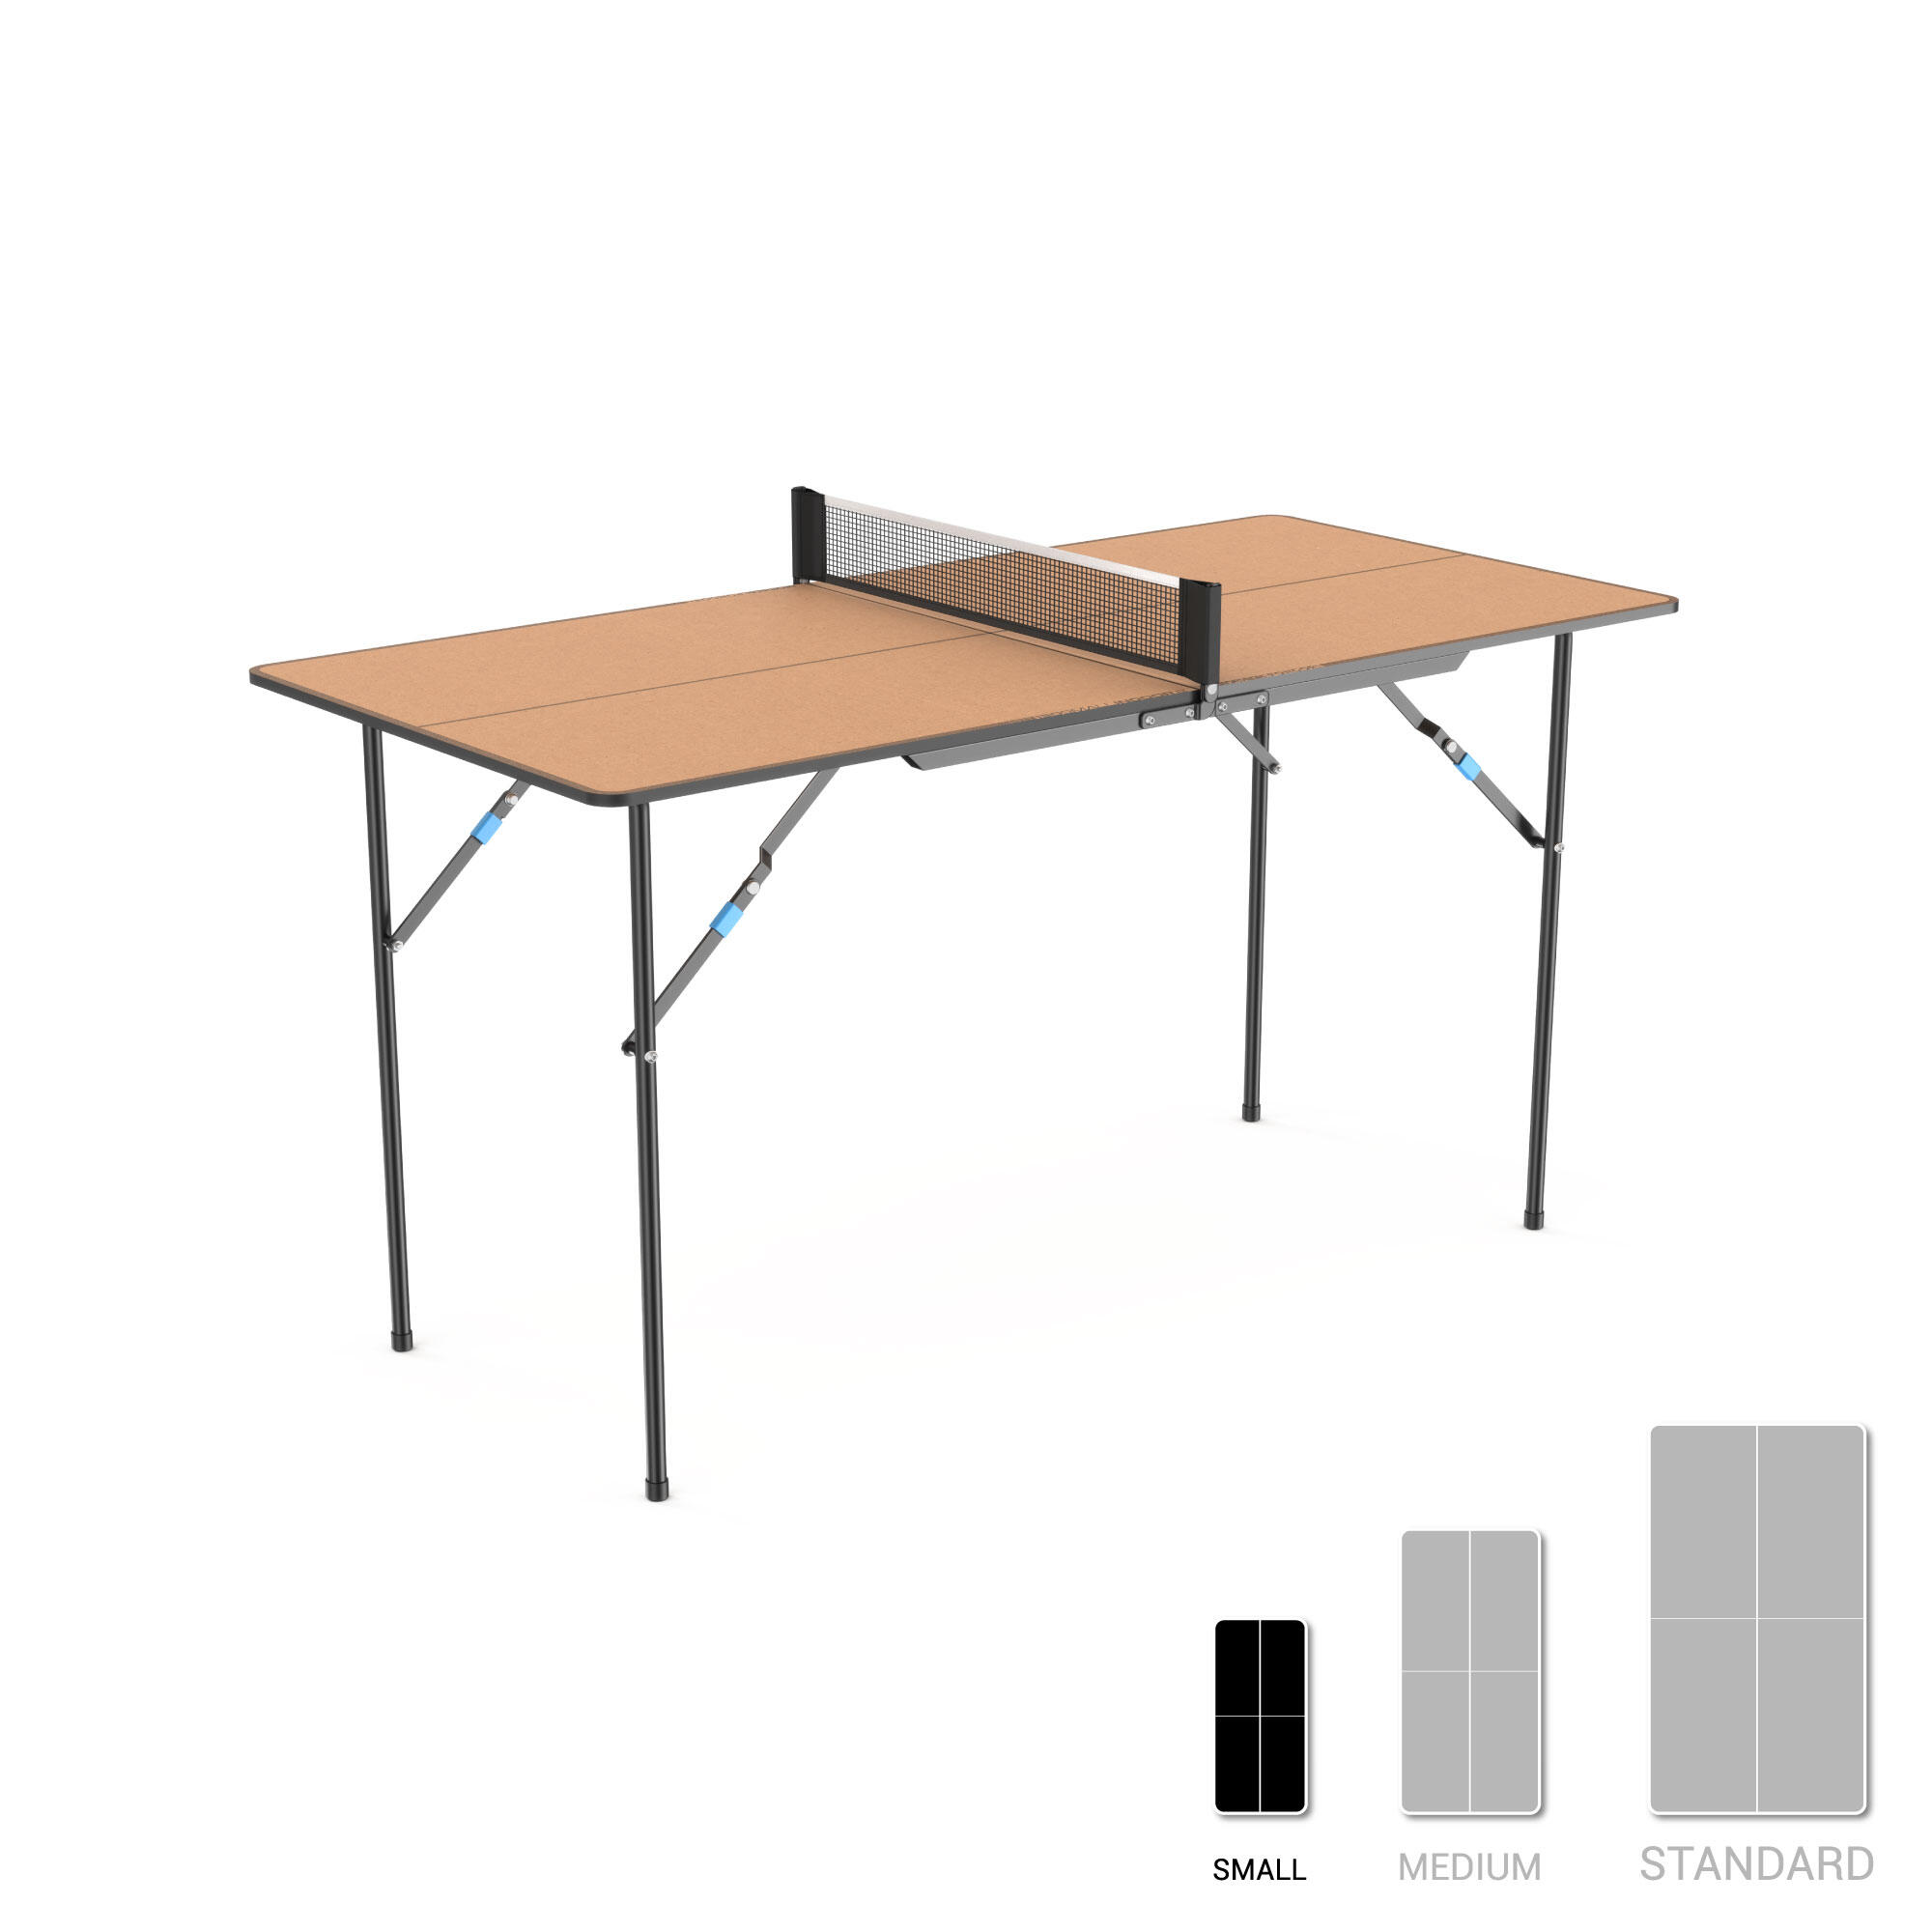 Table Tennis Table PPT 130 Small Indoor.2  4/17